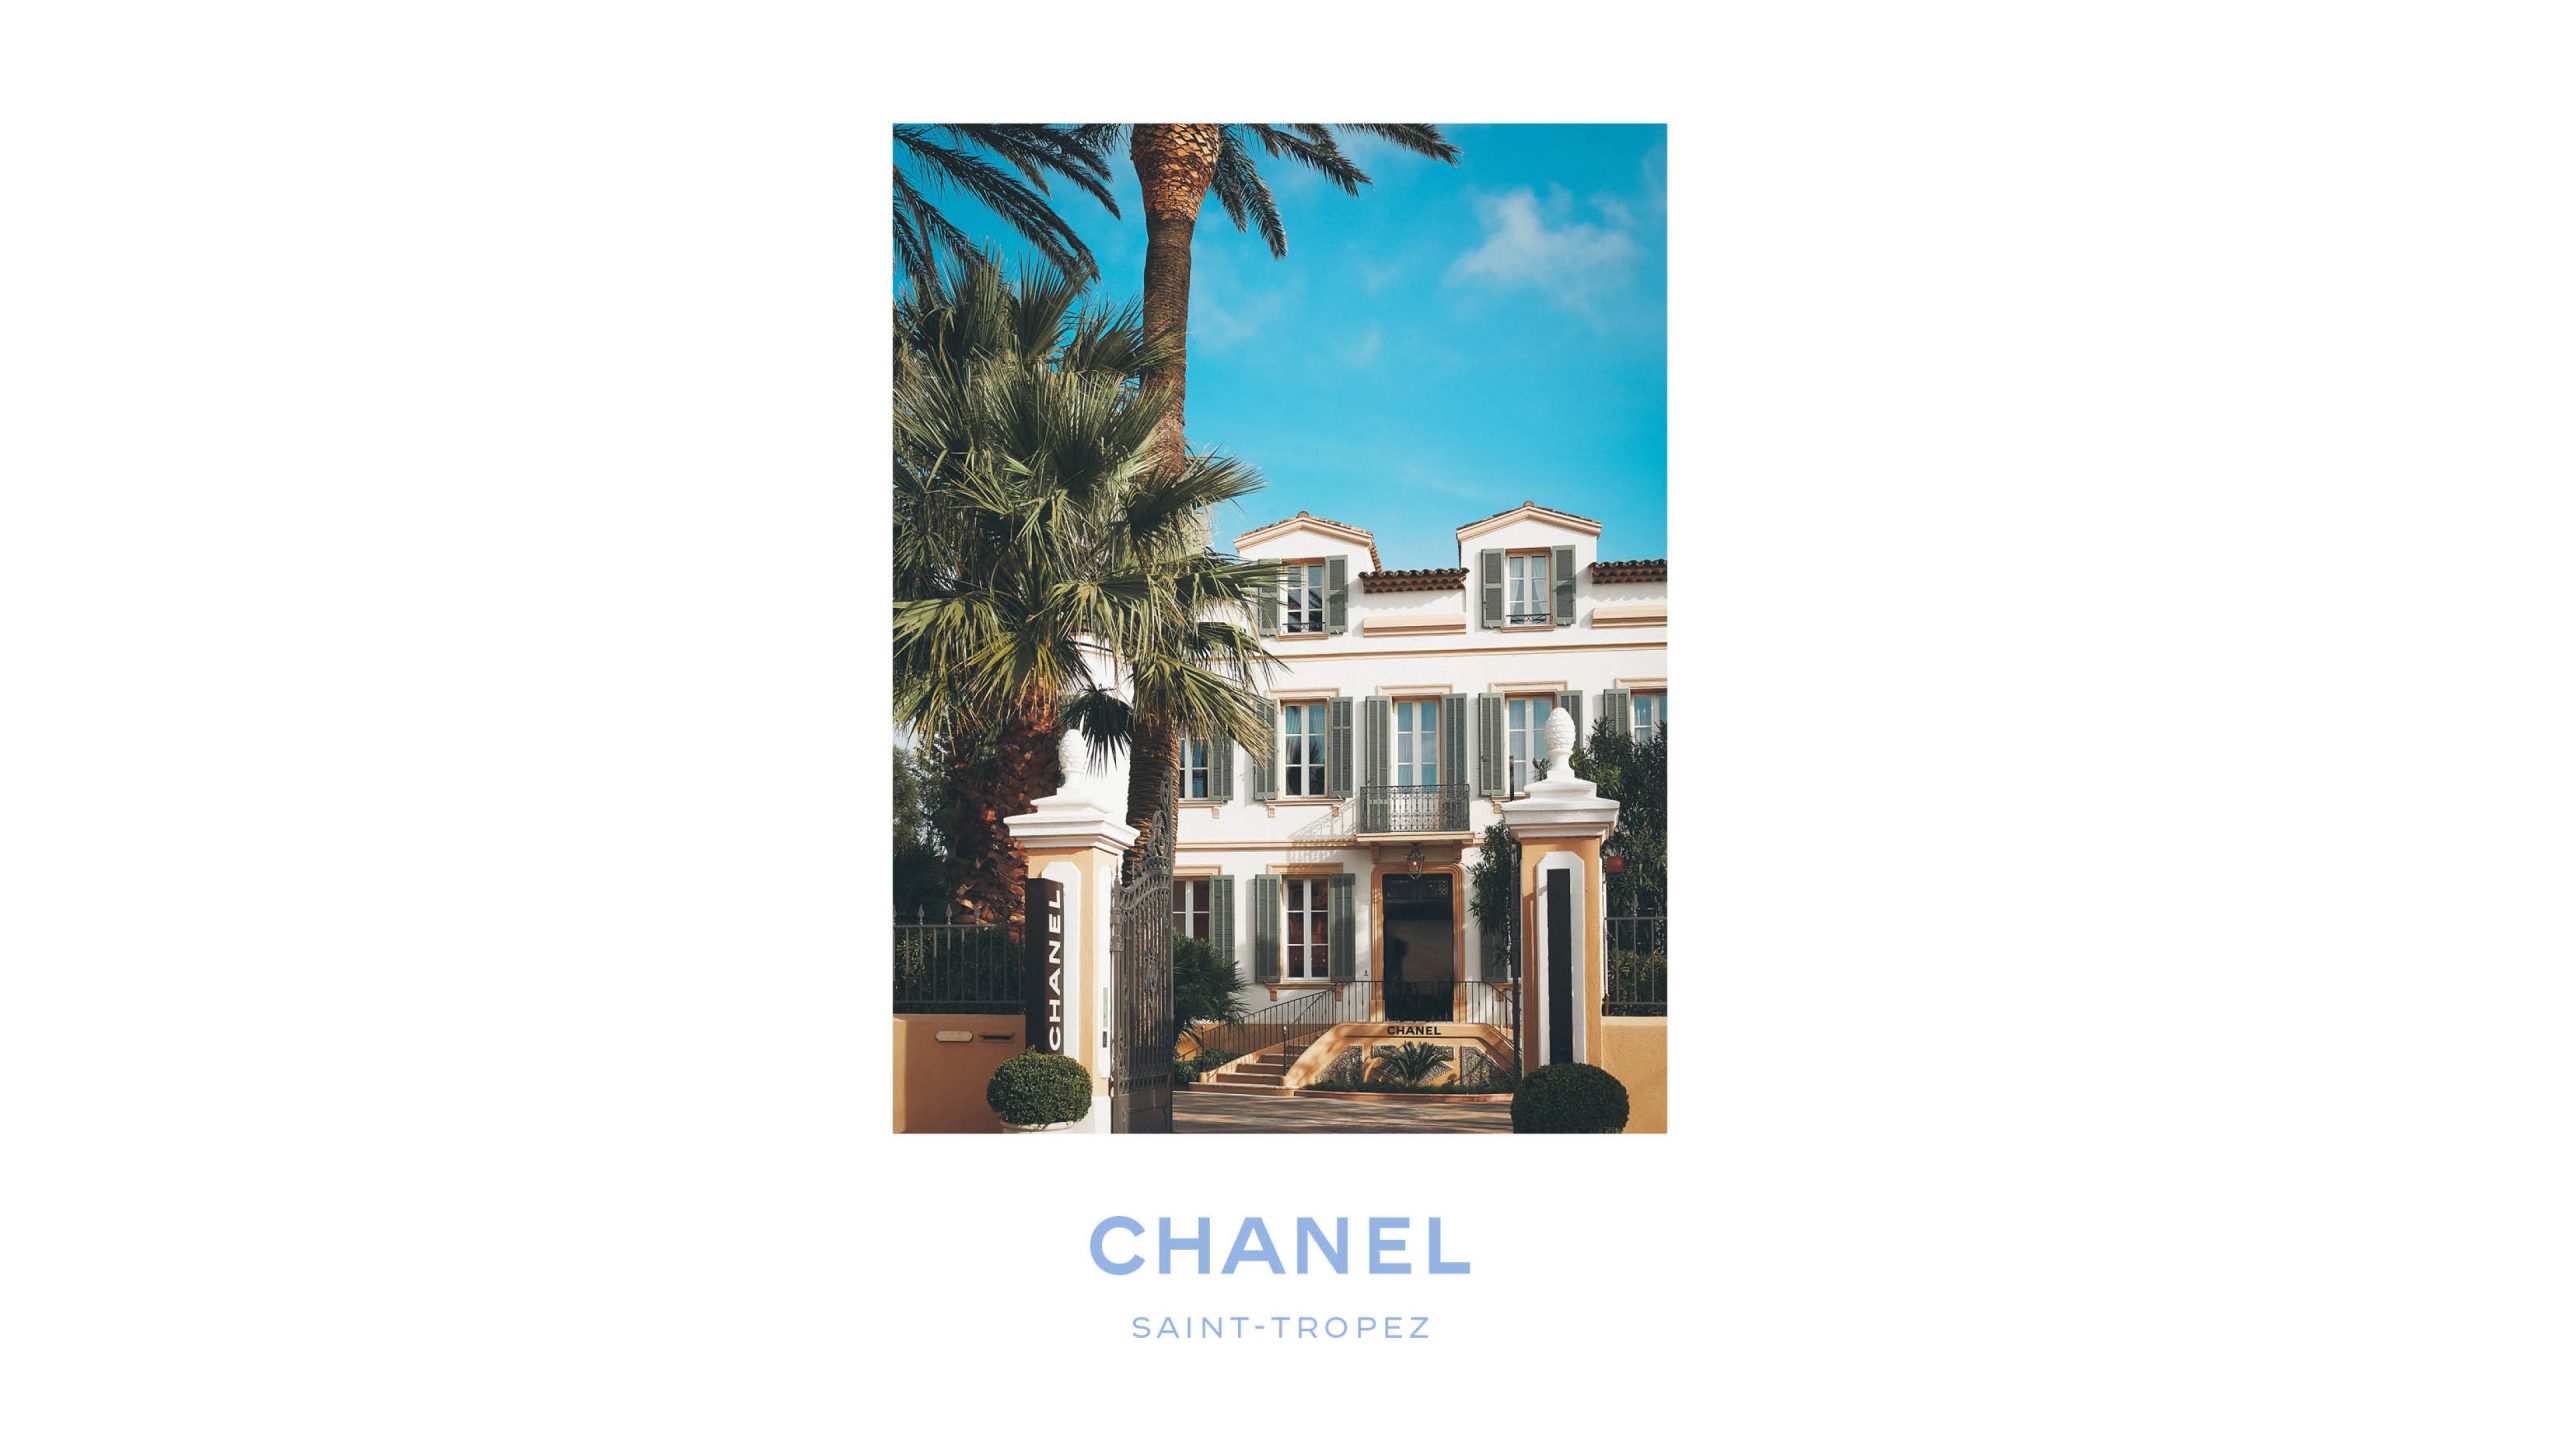 Chanel in Saint-Tropez: guided visit of the temporary store in images